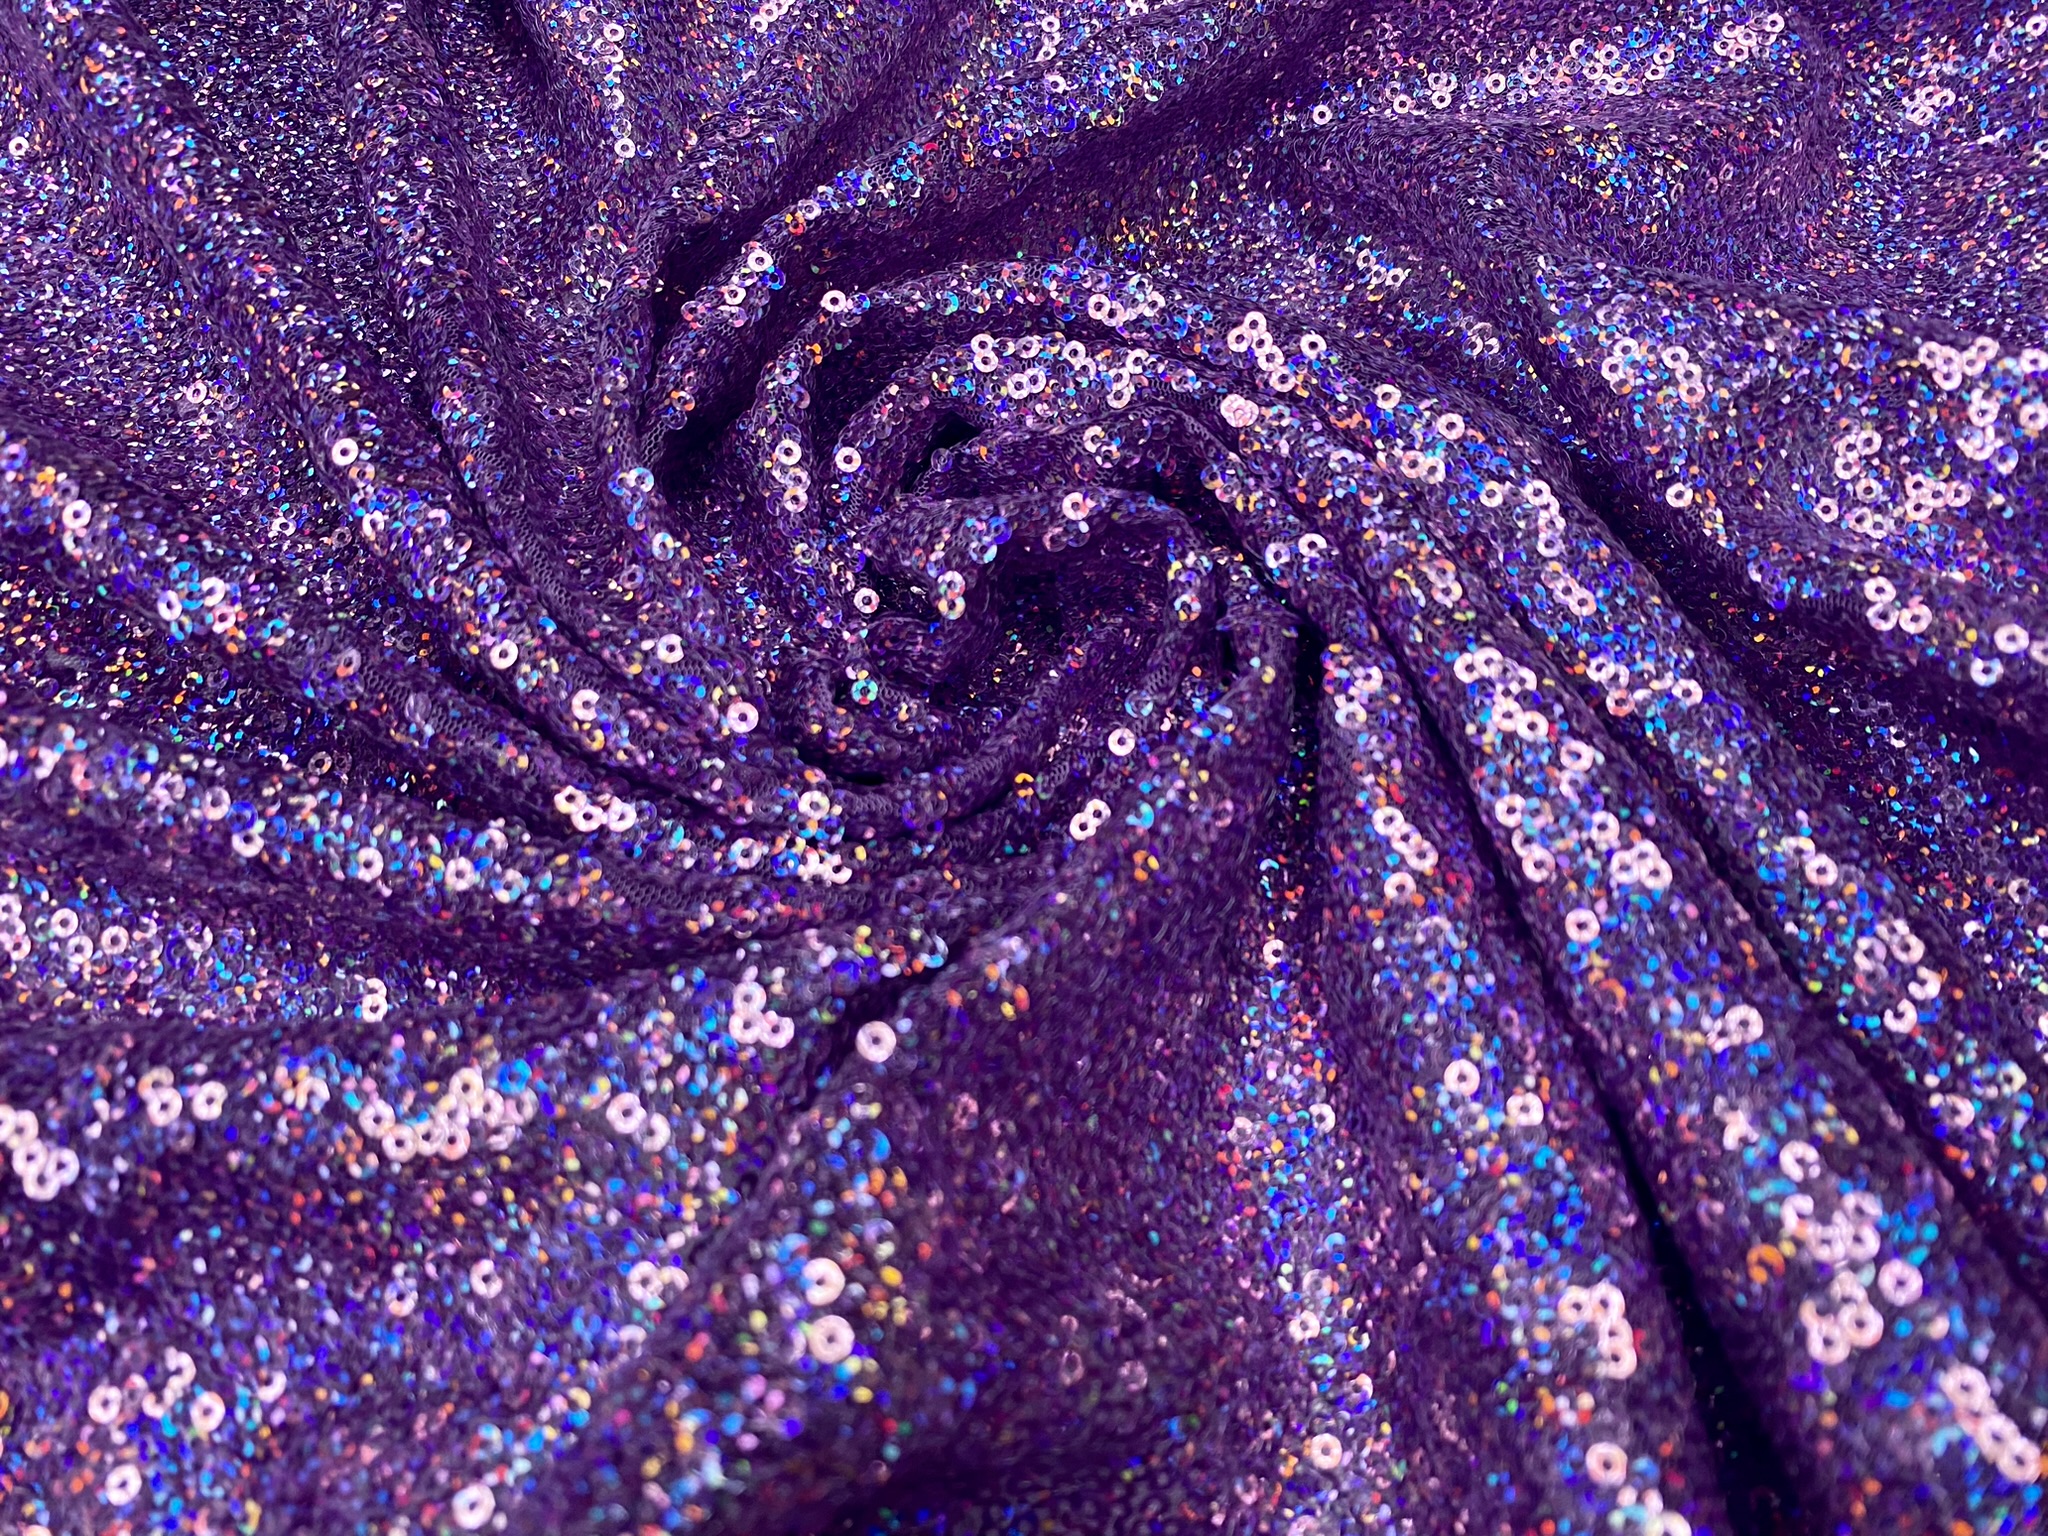 3mm Mini Sequins Fabric Material - 1 way stretch - 130cm or 51